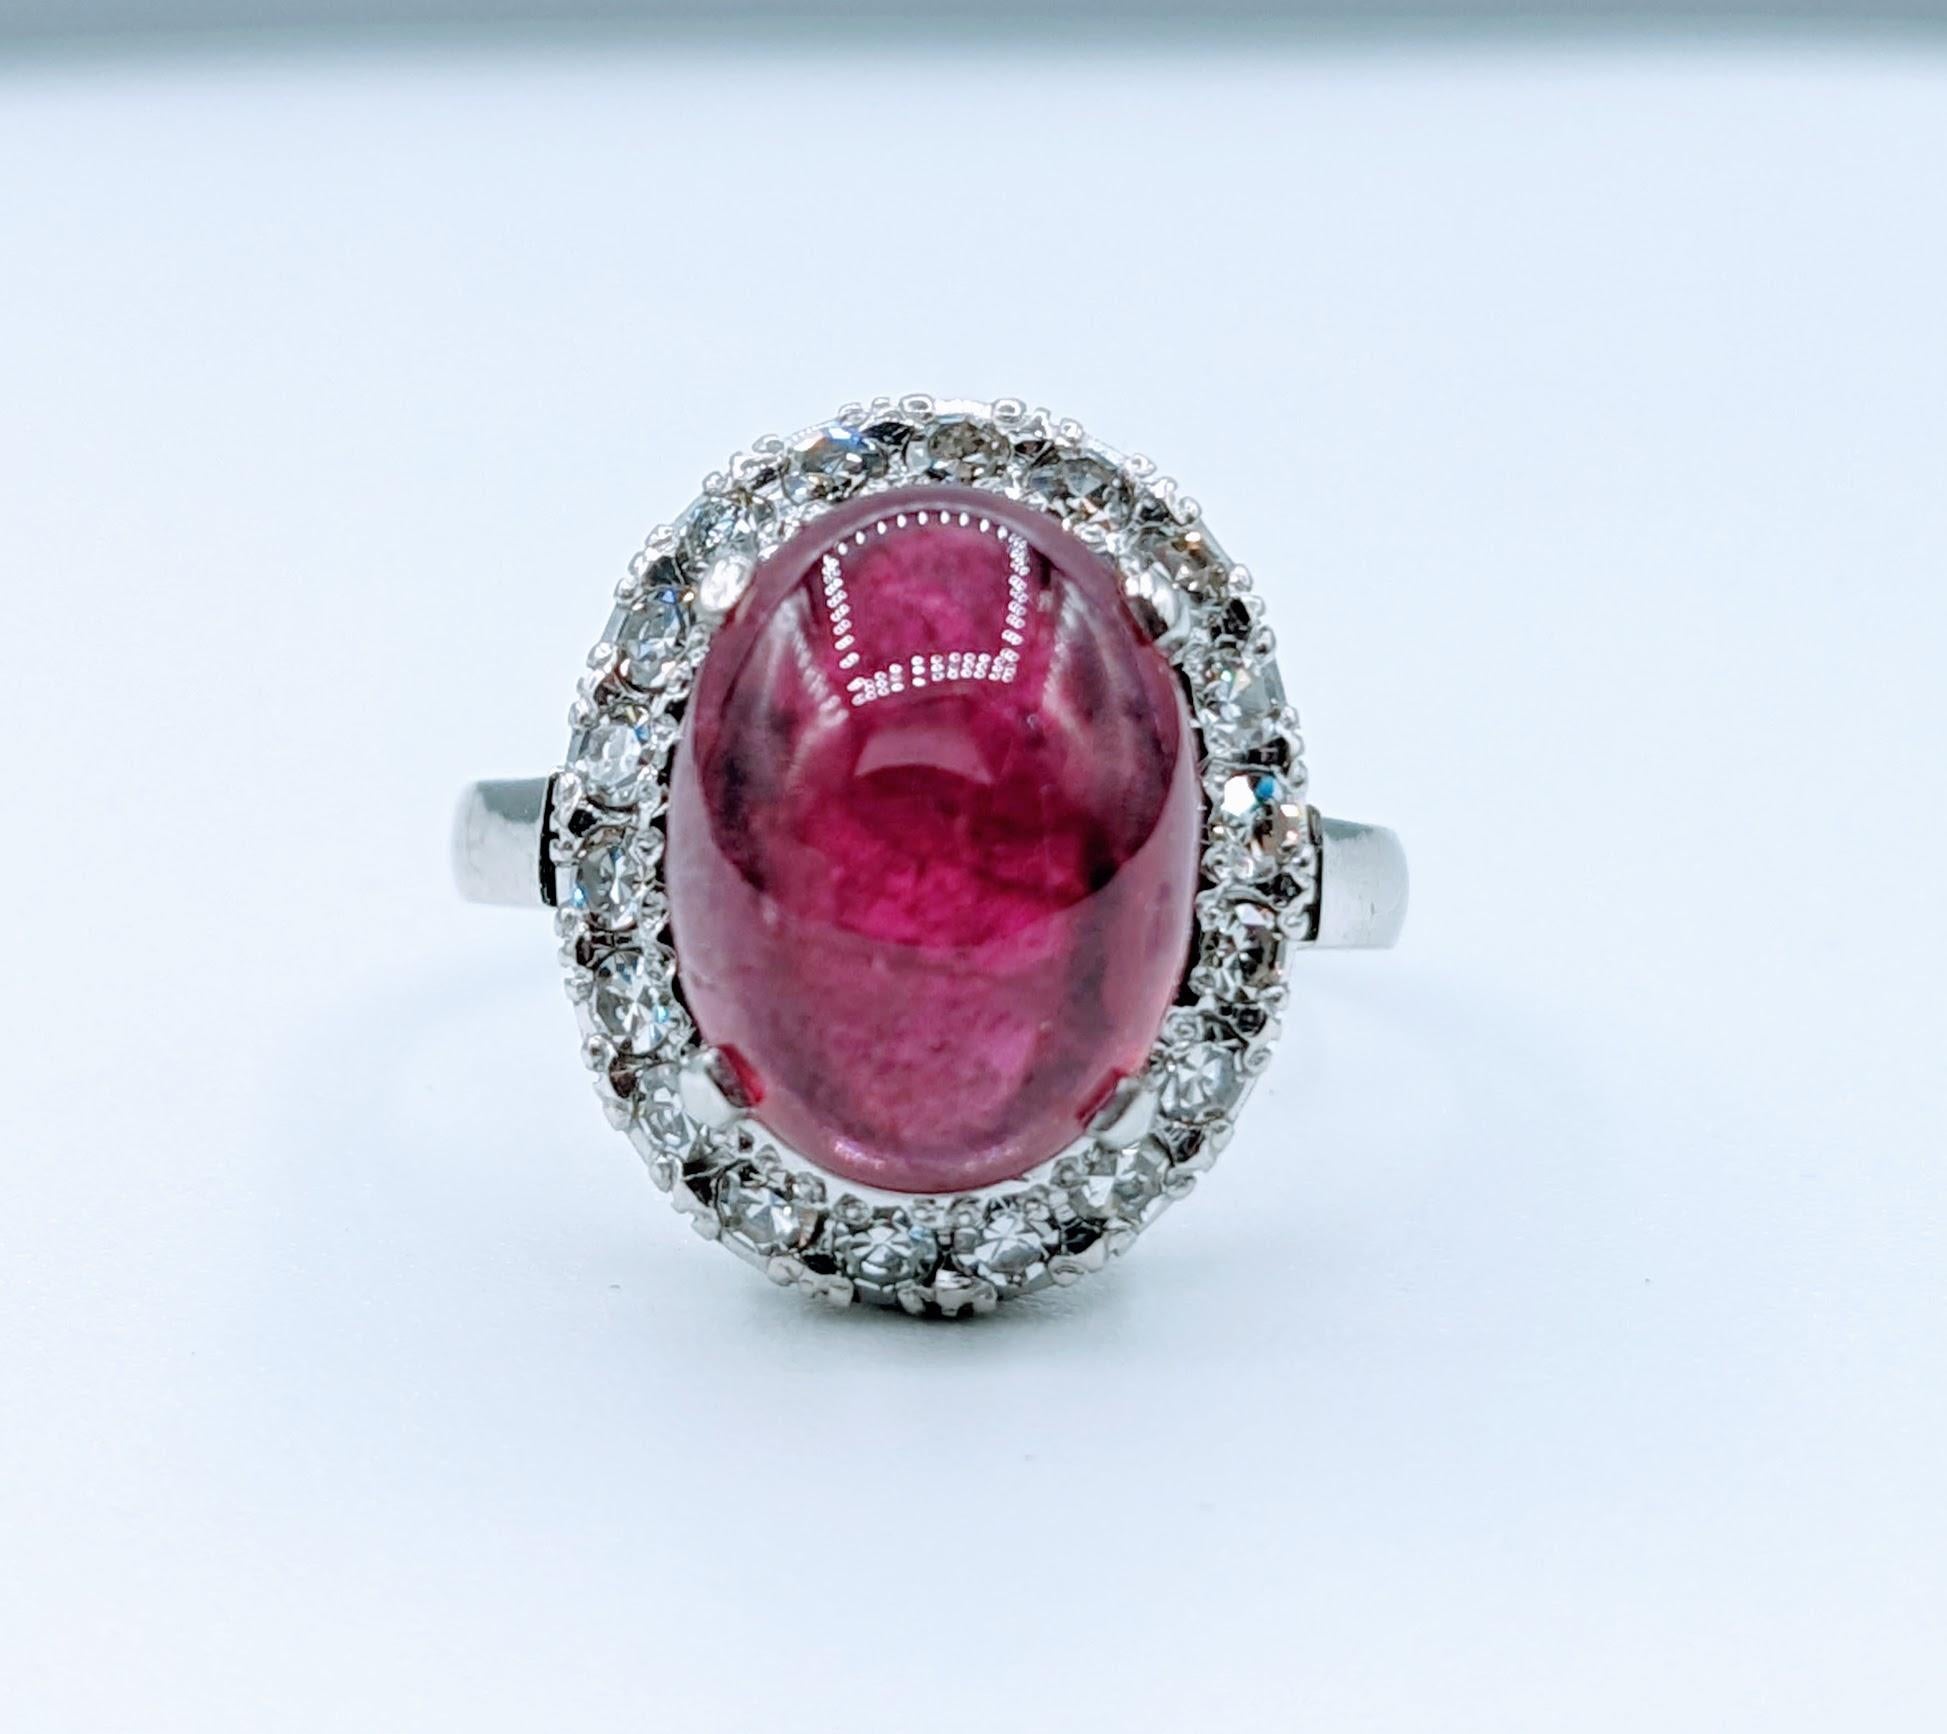 Magnificent 4.43ct Rubellite Cabochon Tourmaline & Diamond Platinum Ring

Presenting an exquisite jewelry masterpiece - a magnificent platinum ring embellished with a stunning 4.43 carat rubellite tourmaline and 1.5 carats of dazzling single cut